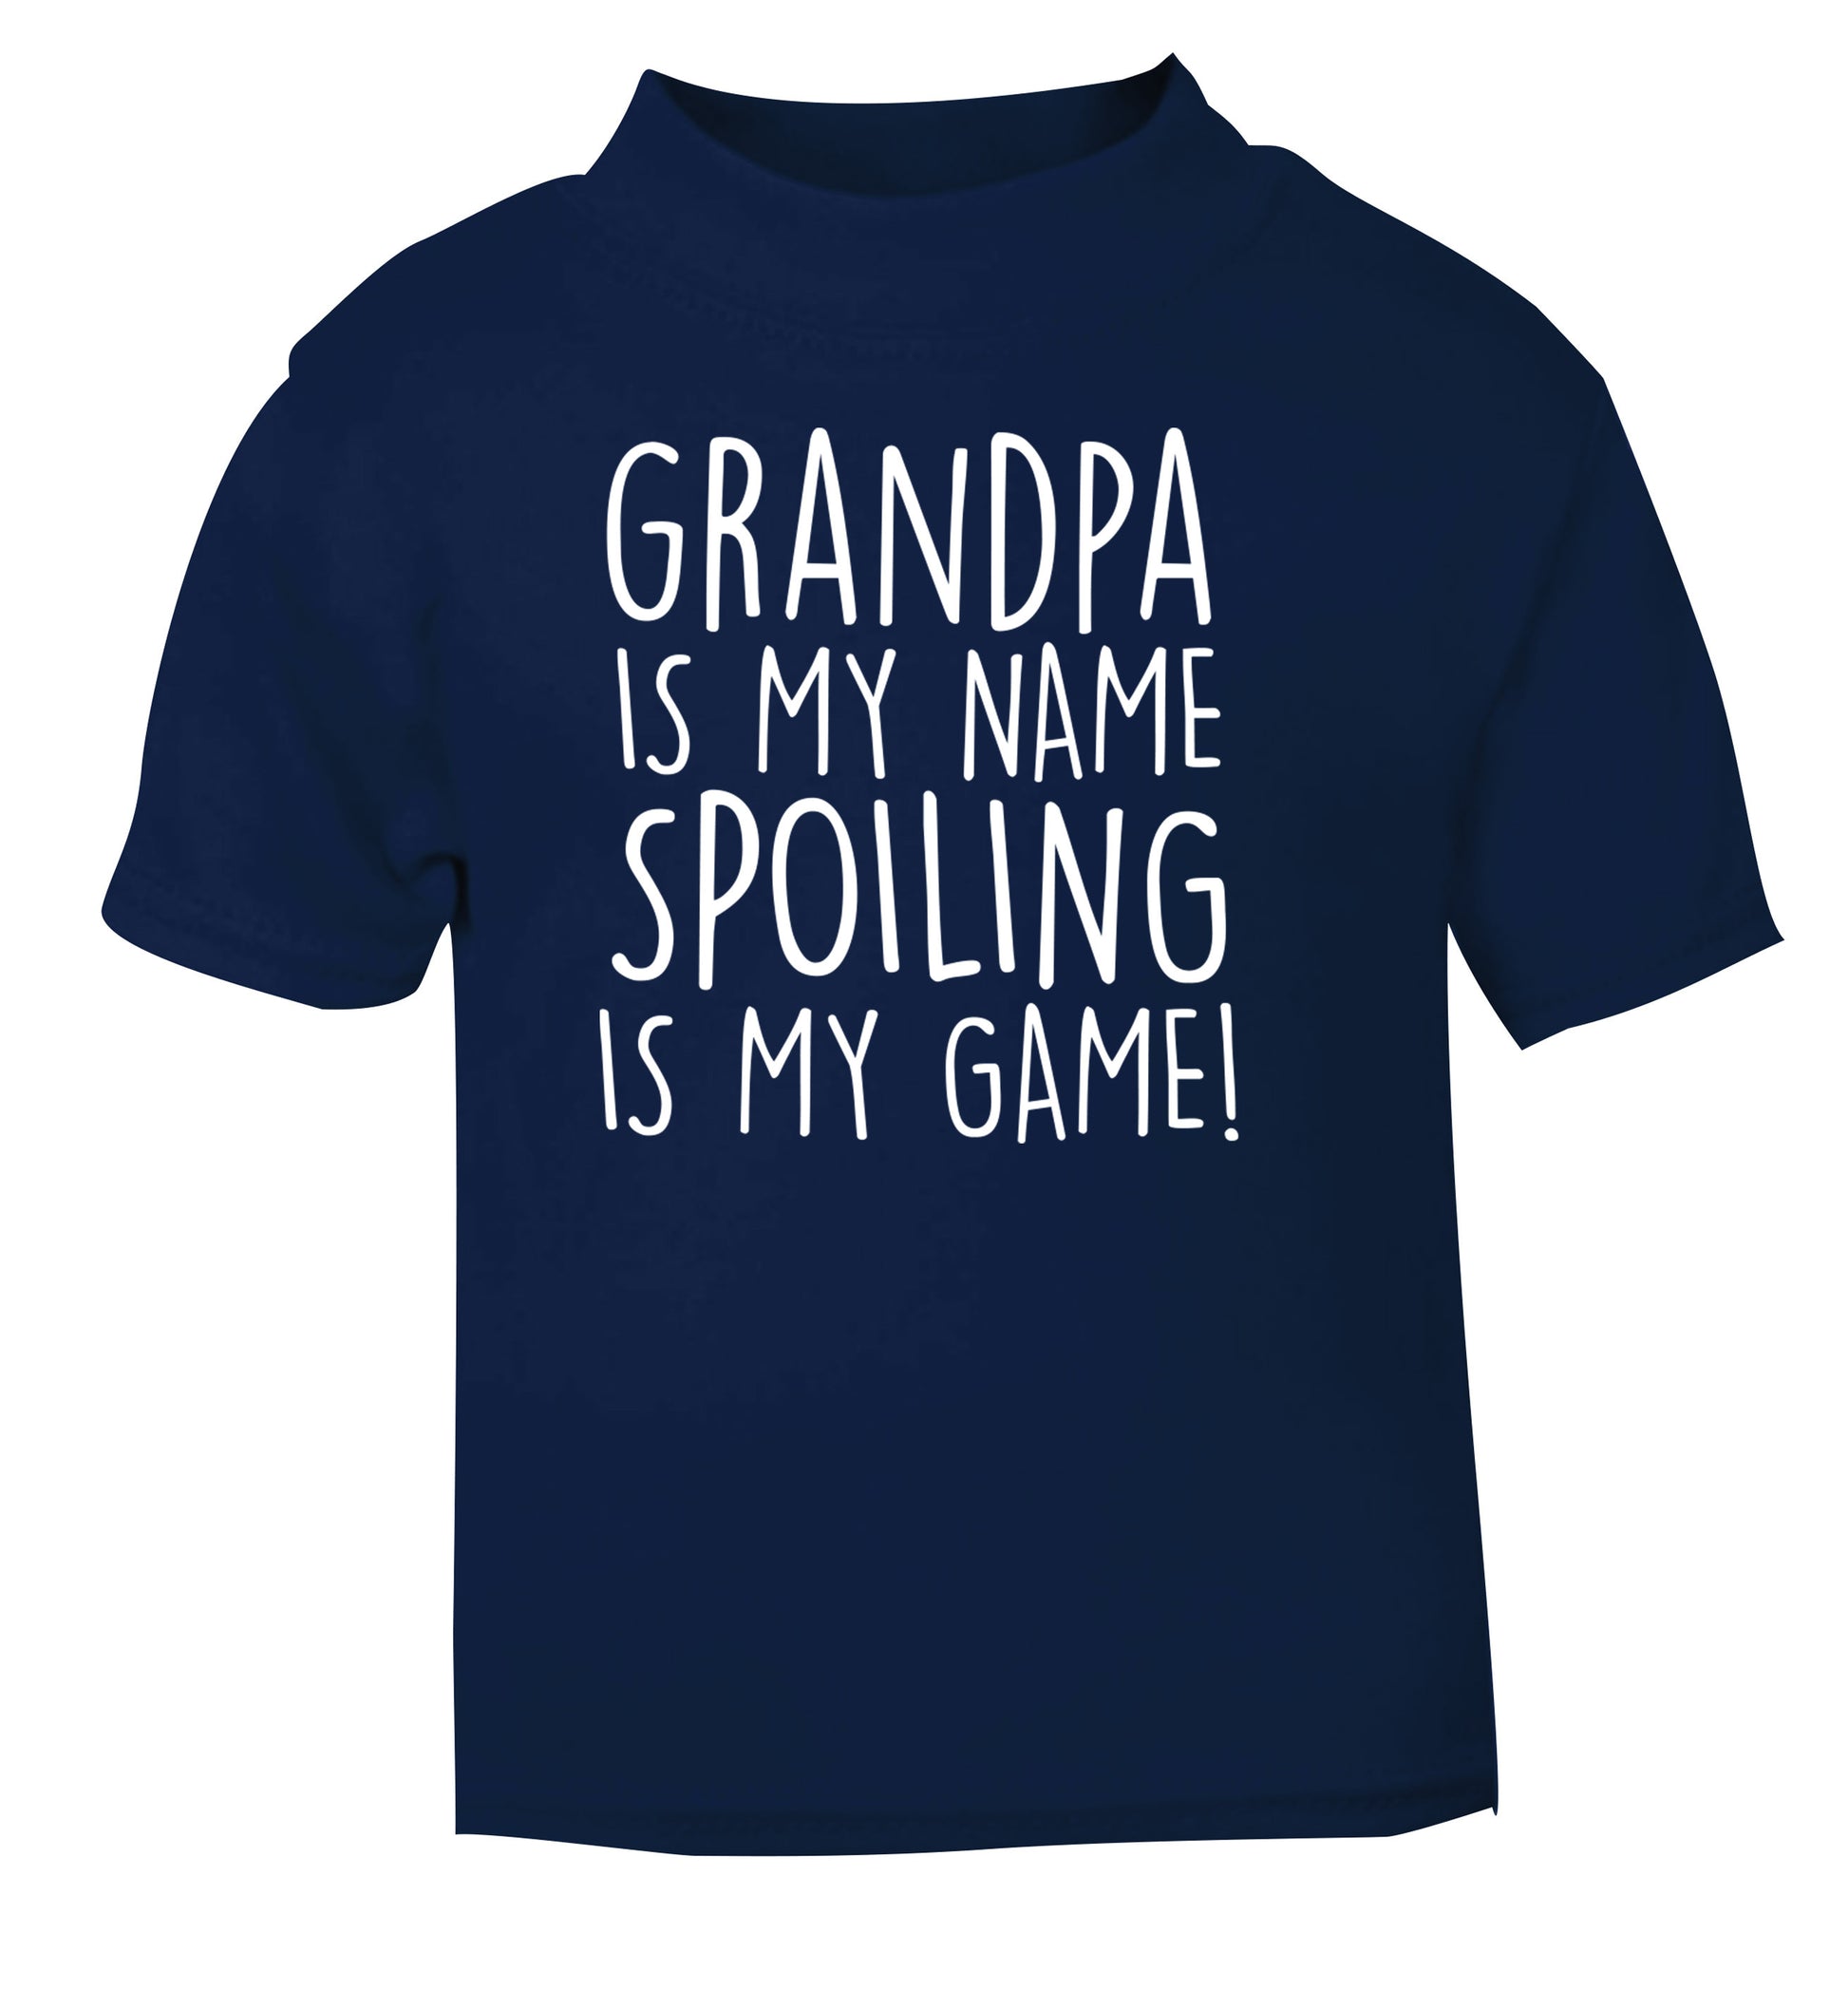 Grandpa is my name, spoiling is my game navy Baby Toddler Tshirt 2 Years